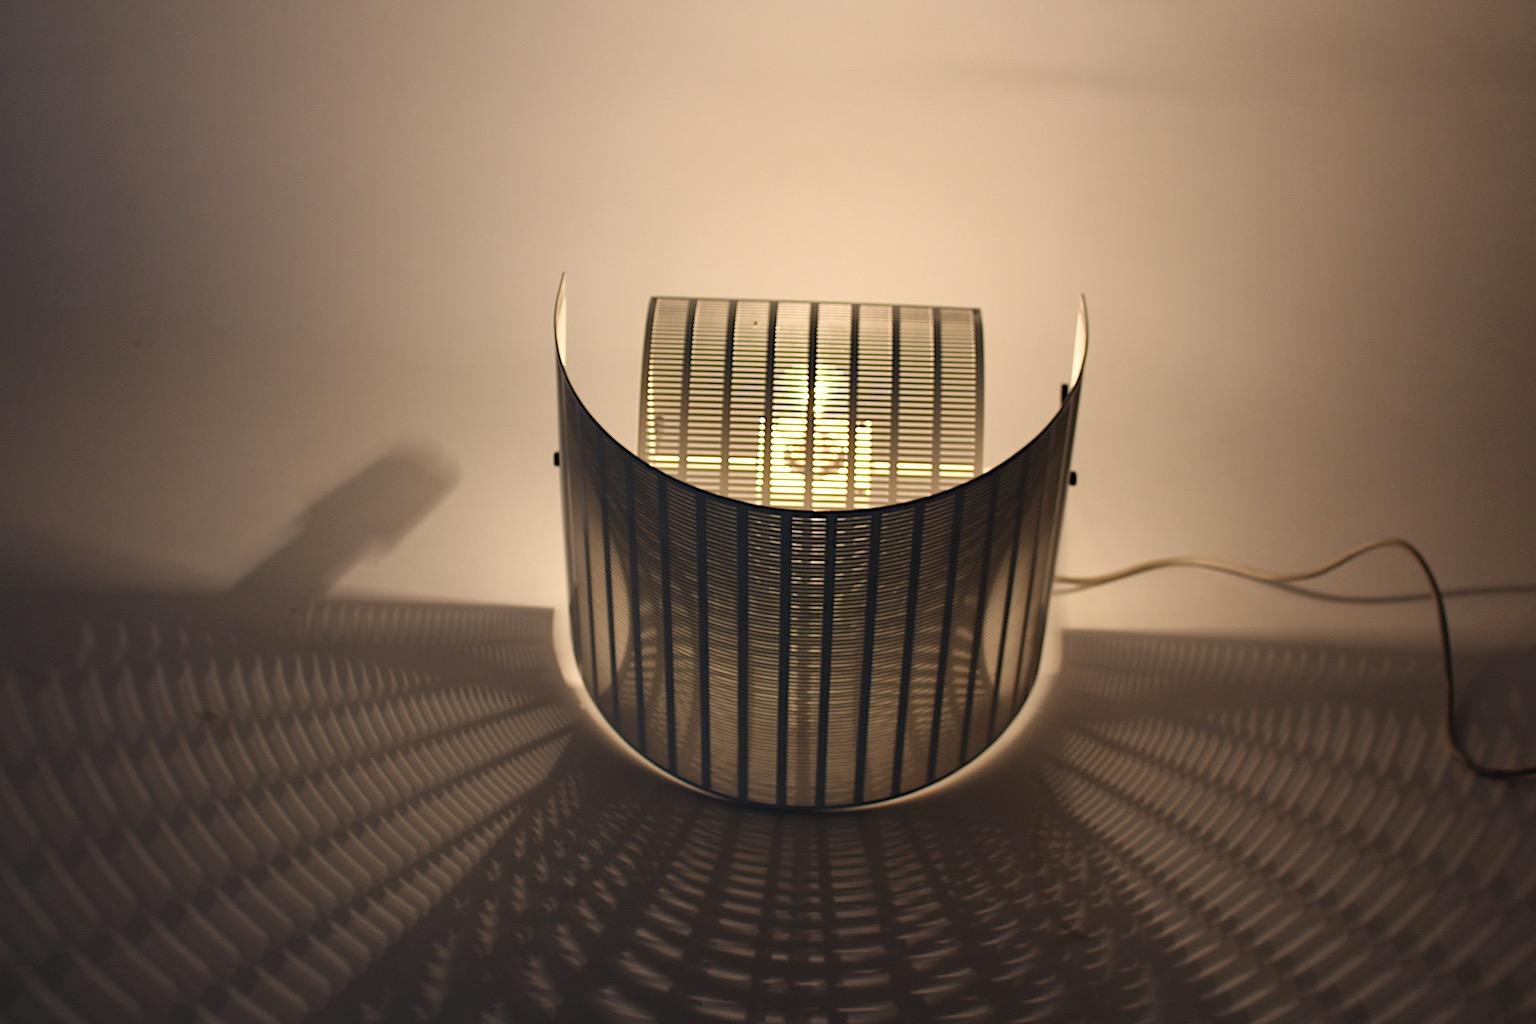 Postmodern White Vintage Sconce or Wall Light Shogun by Mario Botta, 1986 Italy For Sale 5